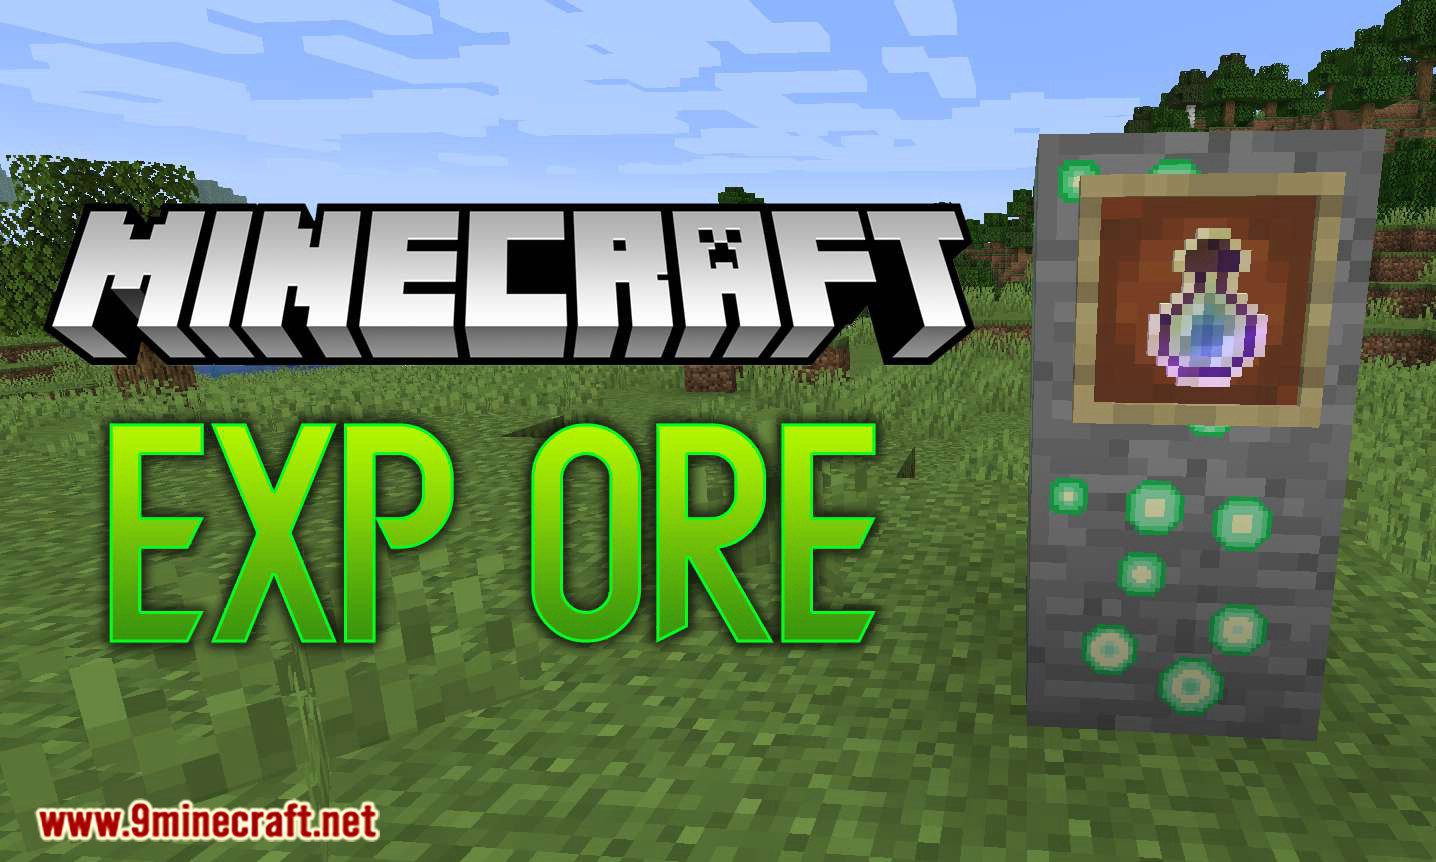 Exp Ore Mod 1 15 1 1 14 4 Adds Experience Ore Block Lurkit